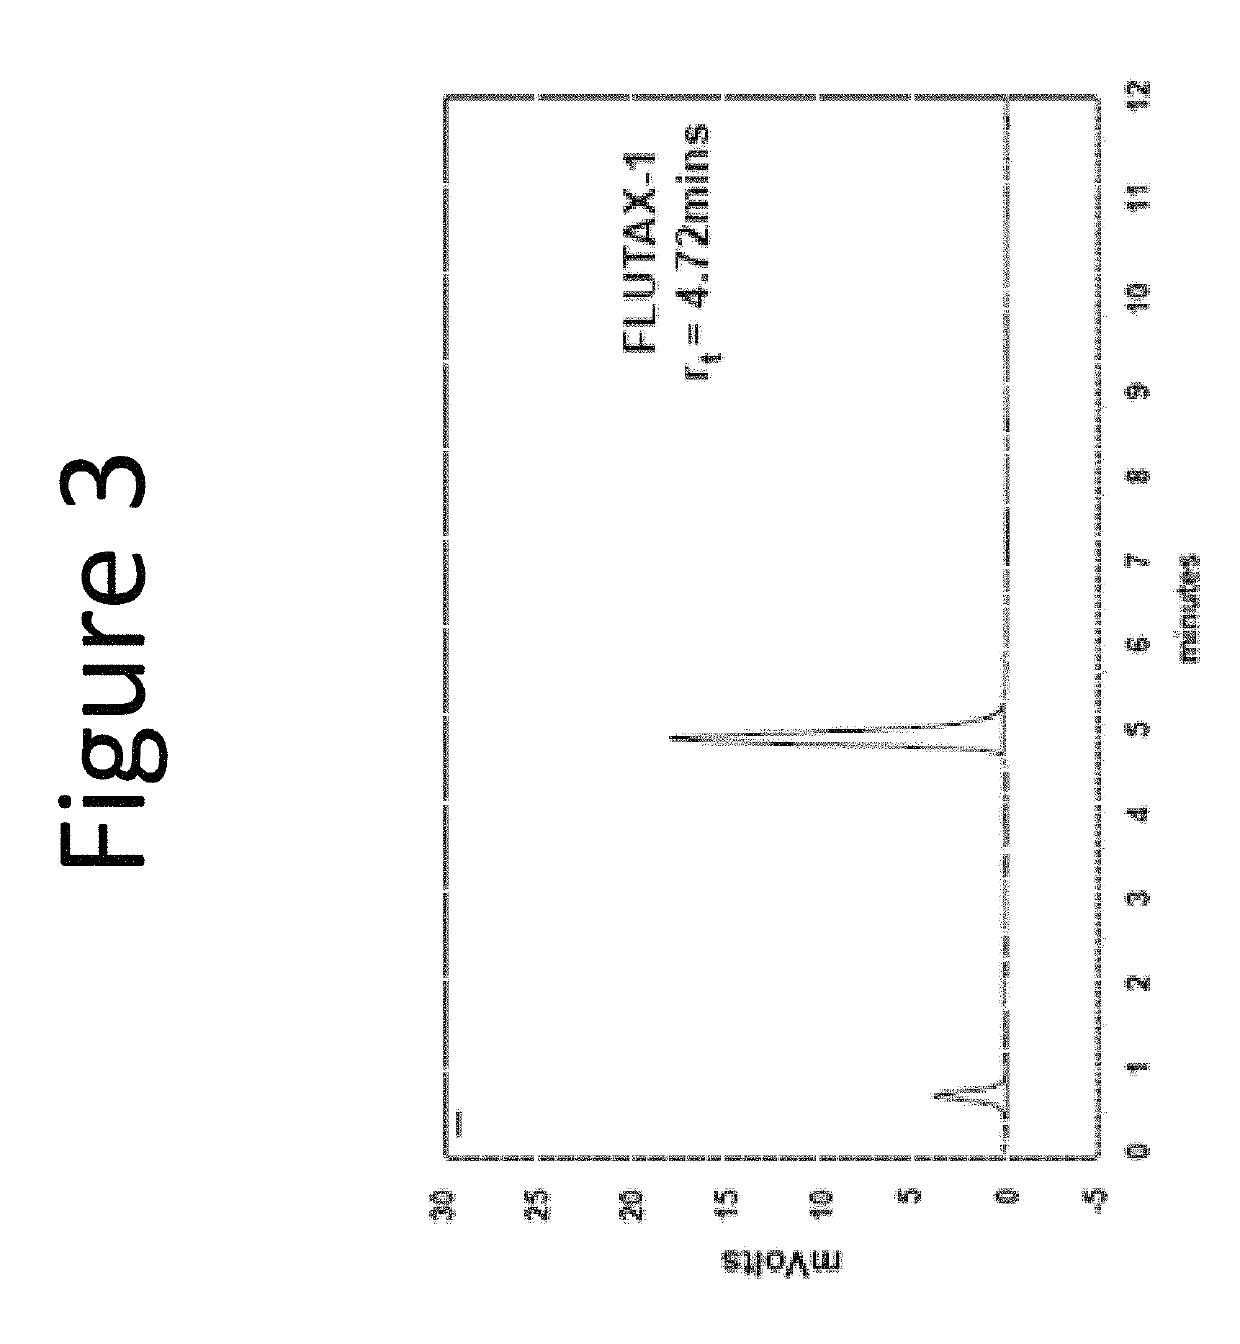 Enhanced loading of intact, bacterially derived vesicles with small molecule compounds